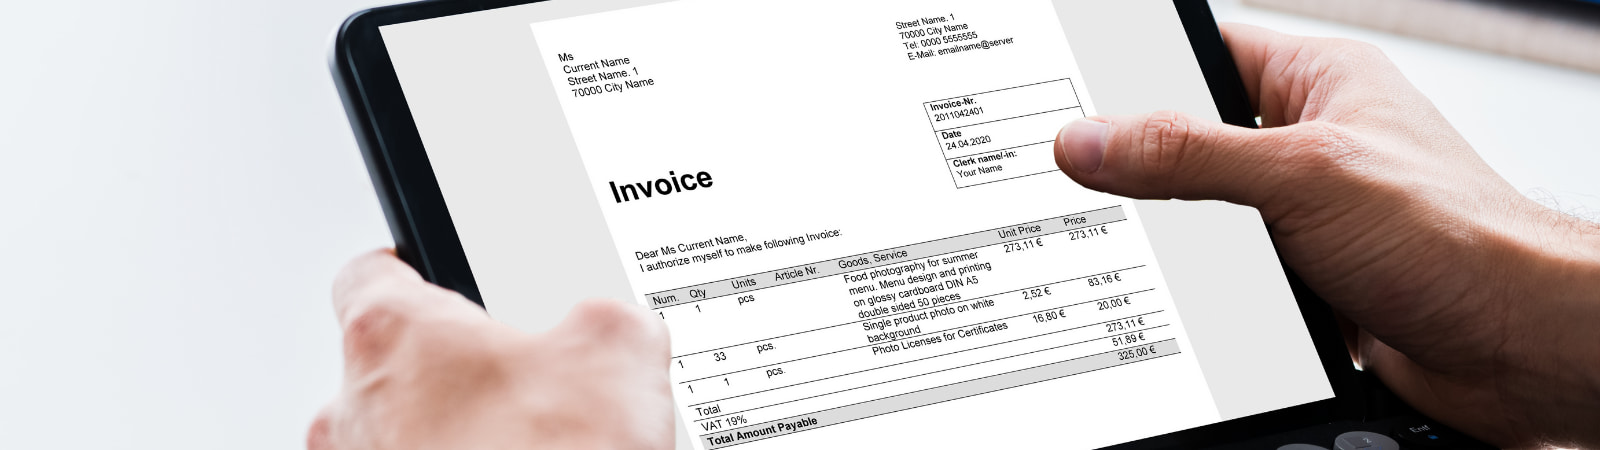 E-Invoicing In Saudi Arabia – Everything You Need To Know For Your Business